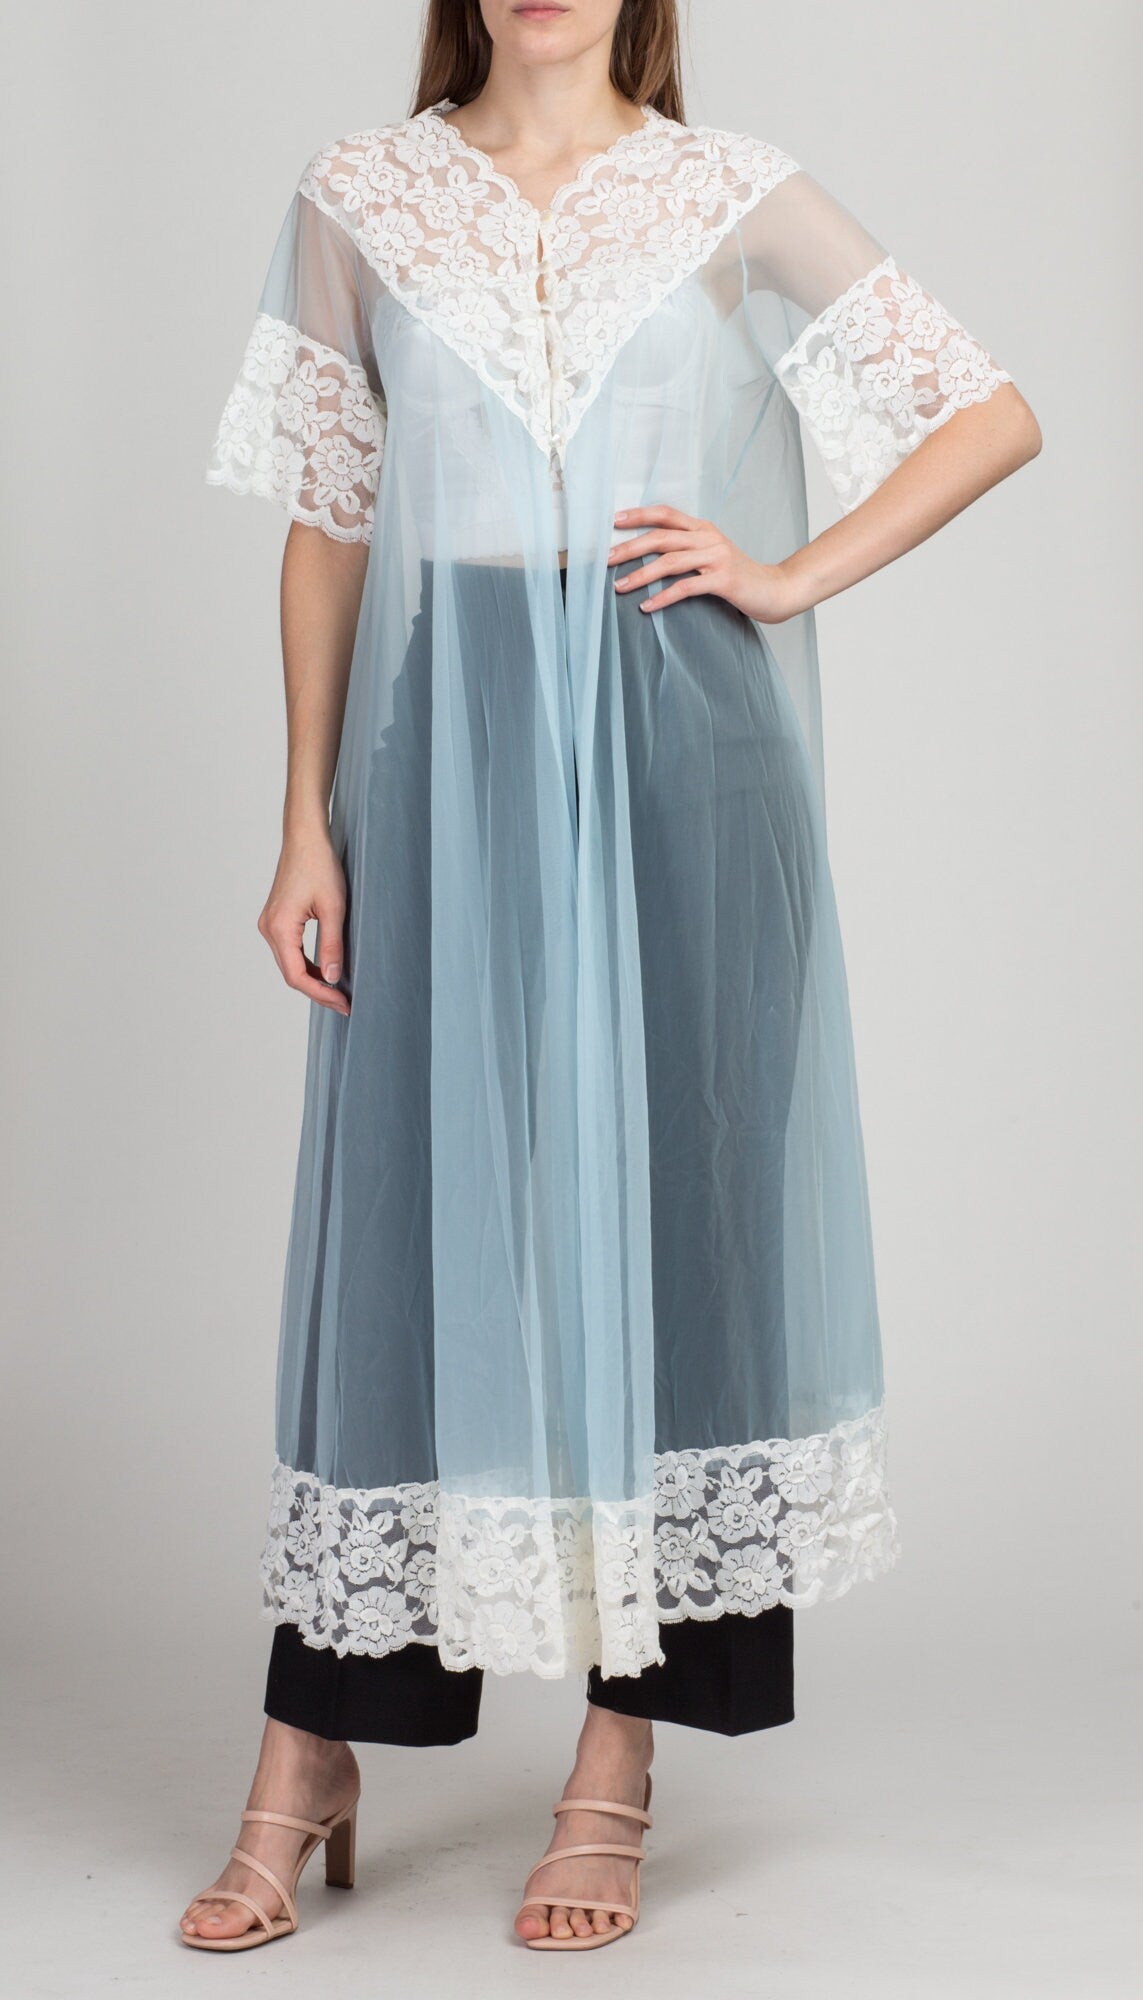 70s Le Voy Blue Lace Trim Peignoir Robe - Small to Medium | Vintage Maxi Negligee Dressing Gown